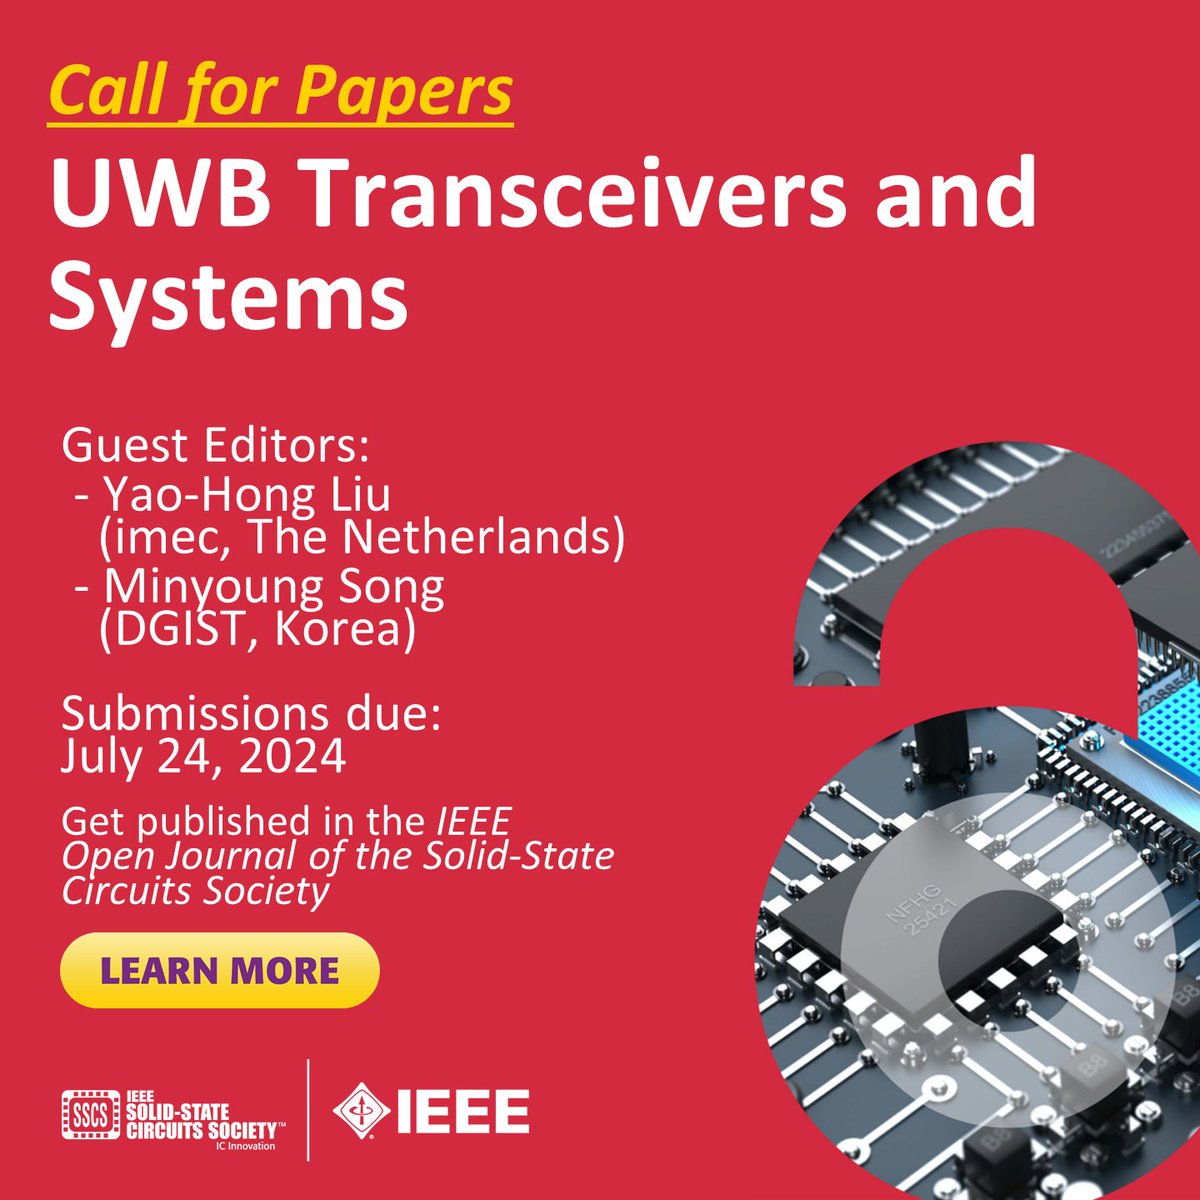 Dive into the realm of UWB Transceivers and Systems with the Open Journal of the Solid-State Circuits Society! Submit your papers for our special issue. Deadline is July 24th! Find more info here: bit.ly/43WG7iZ #CallForPapers #UWBTransceivers #IEEE